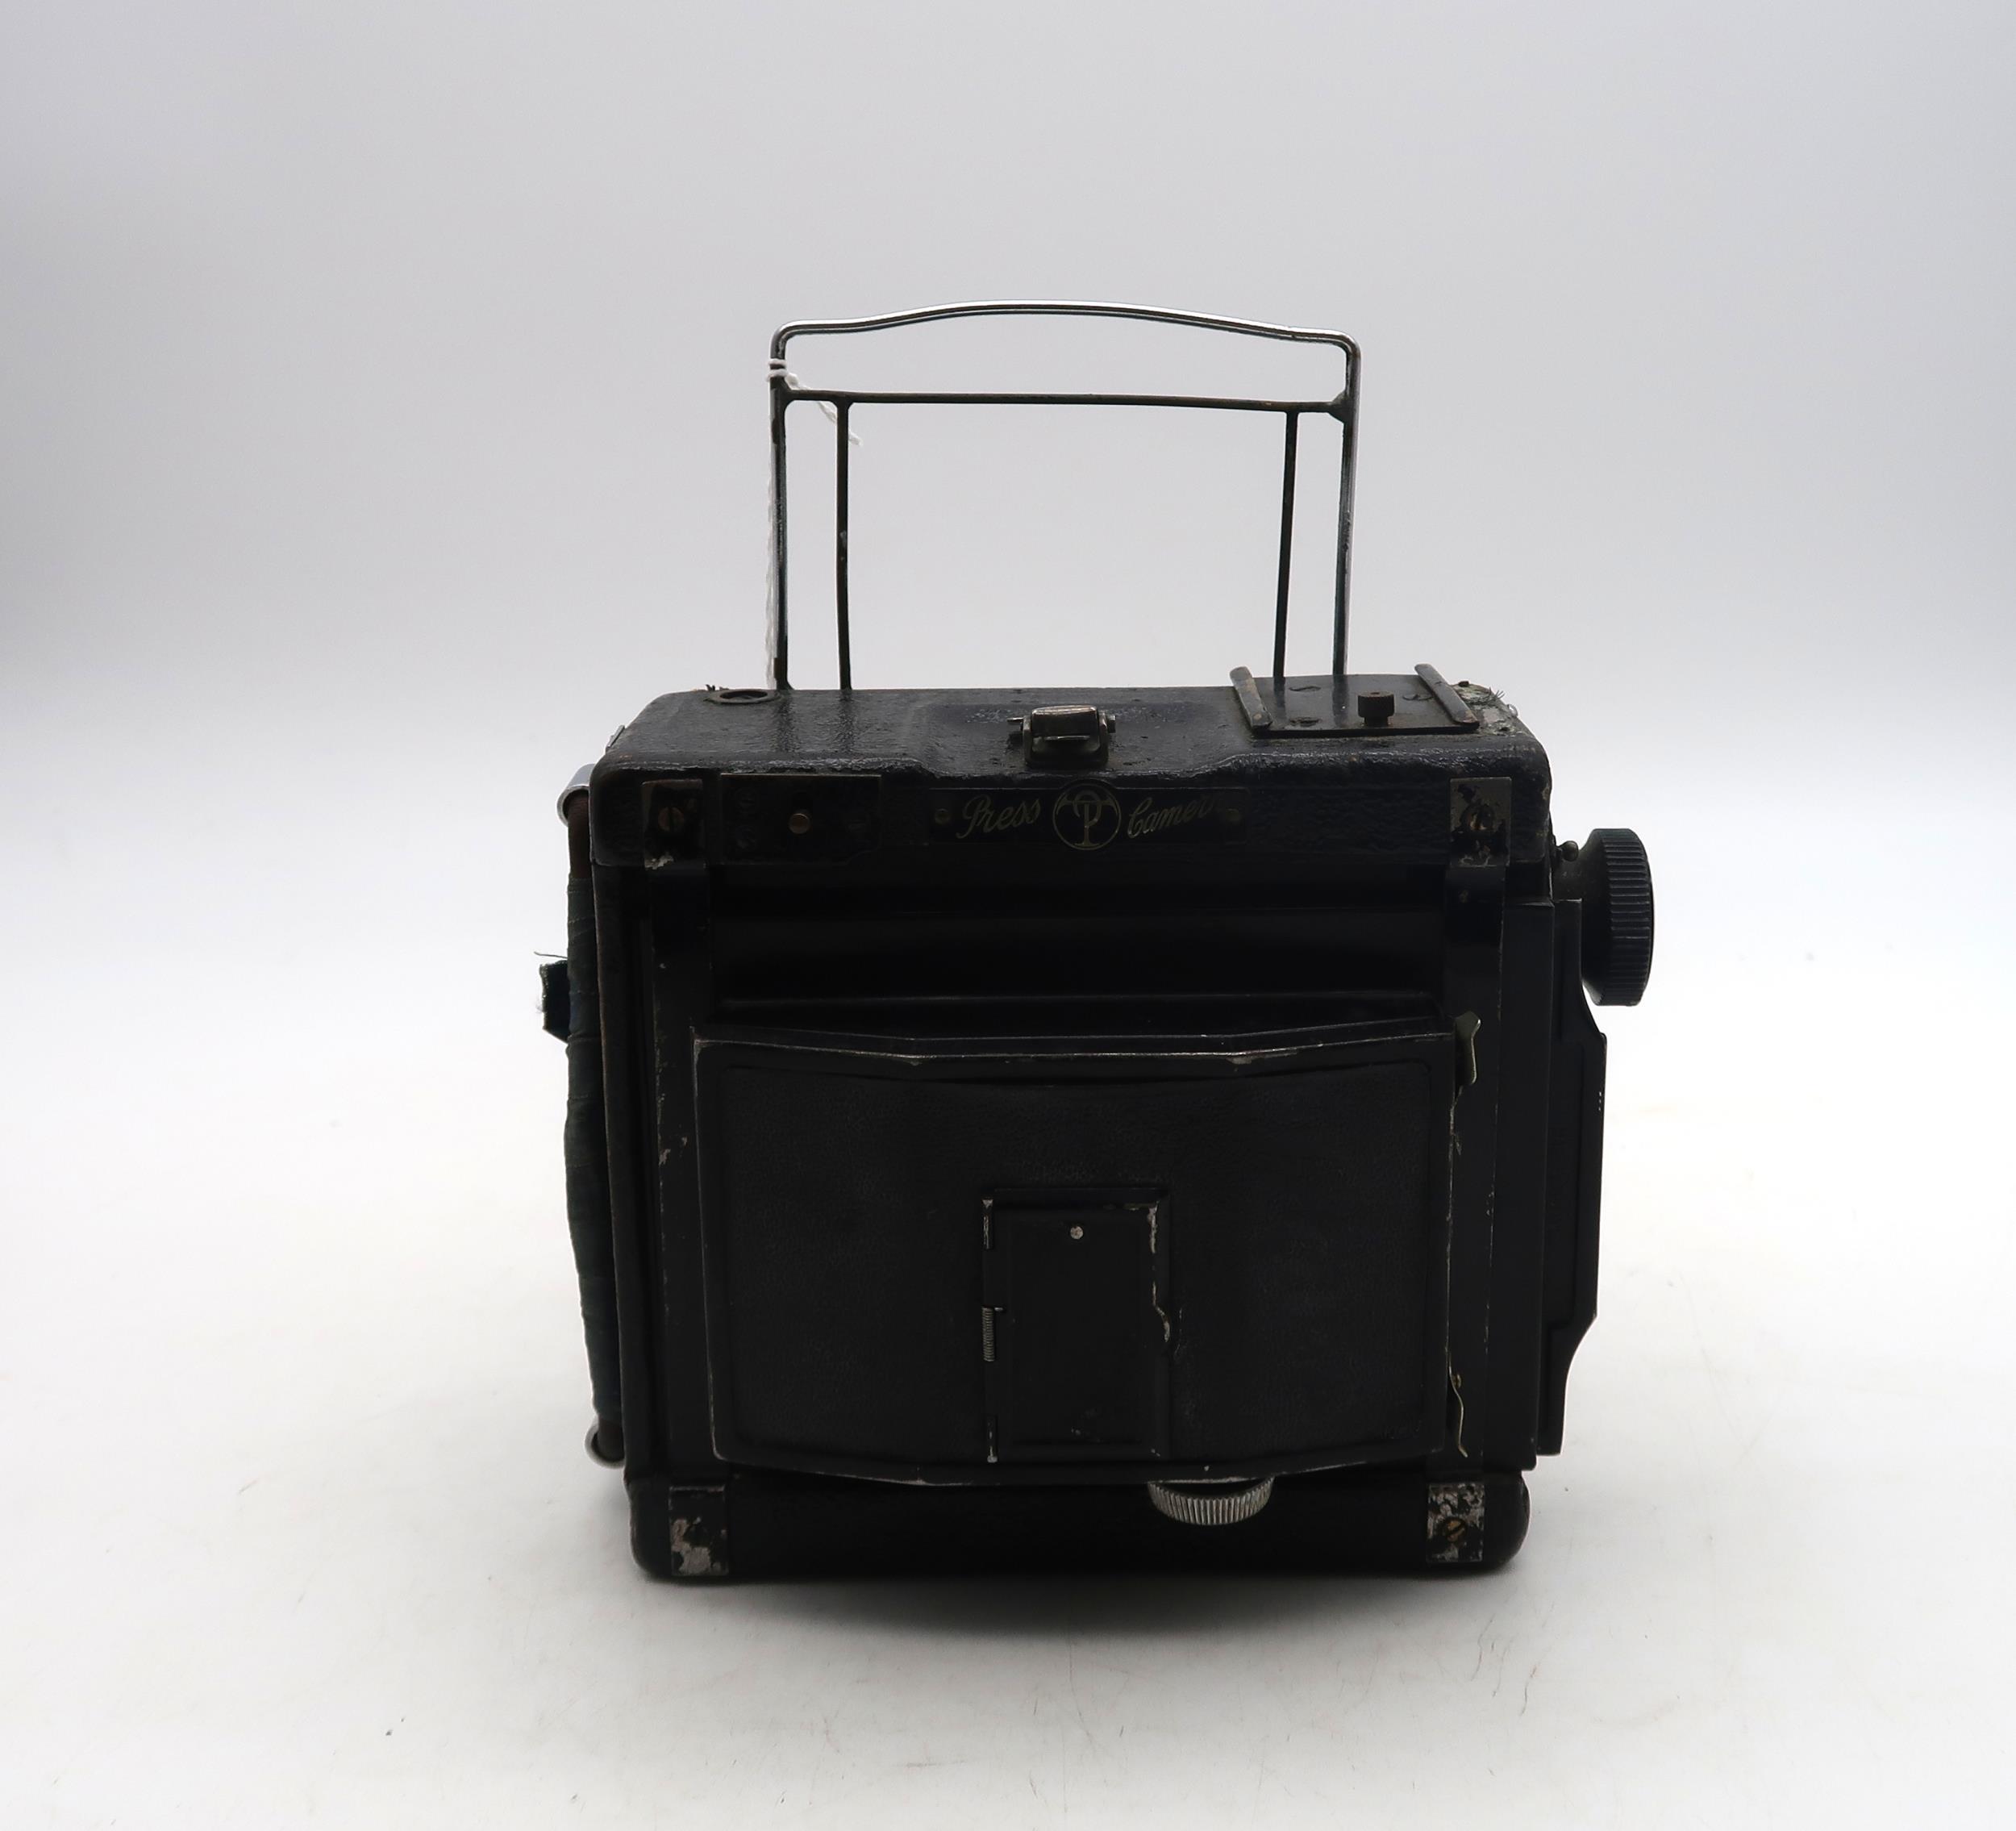 An MPP Micro-Press 5x4 large format camera, fitted with a Schneider Kreuznach Xenar 1:4.5/150 - Image 2 of 4